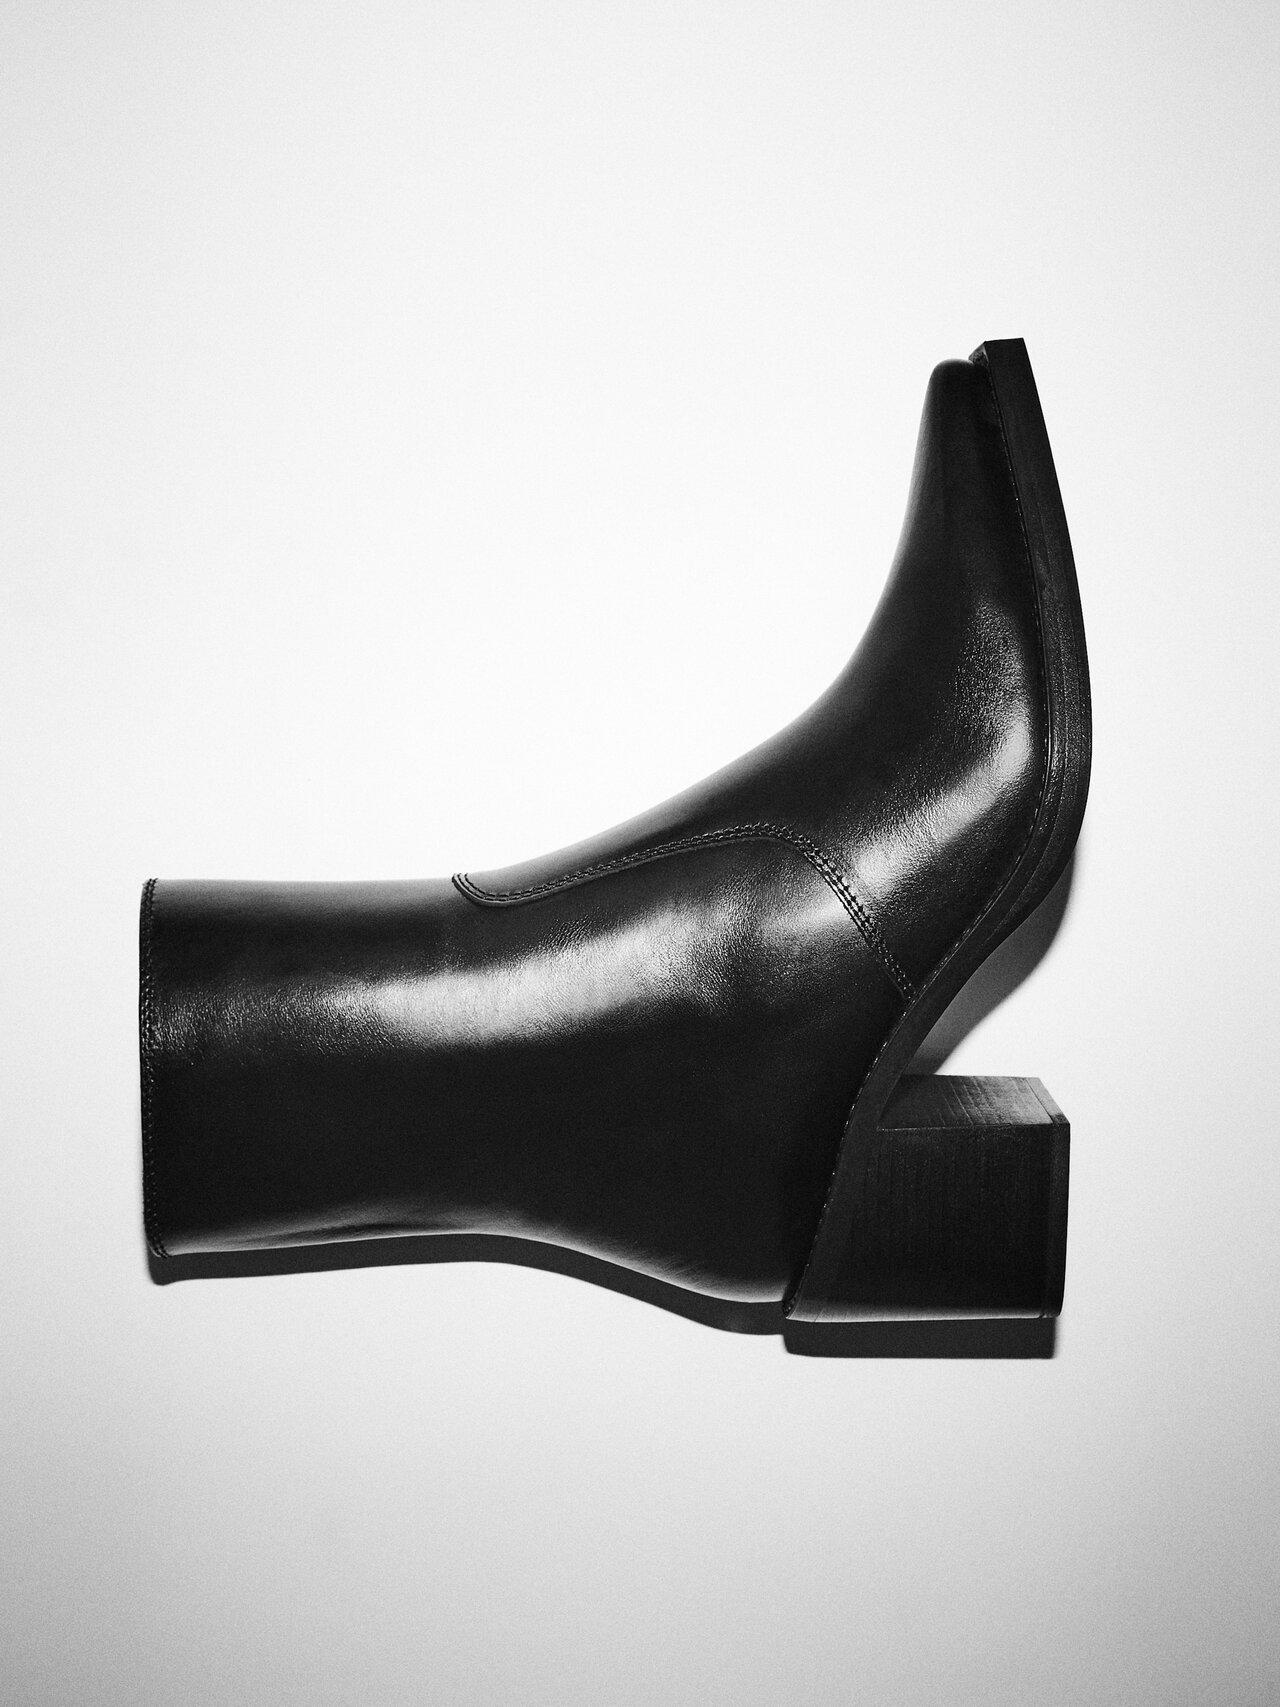 Leather Boots With Square Heel - Black - 7½ - Massimo Dutti - Women